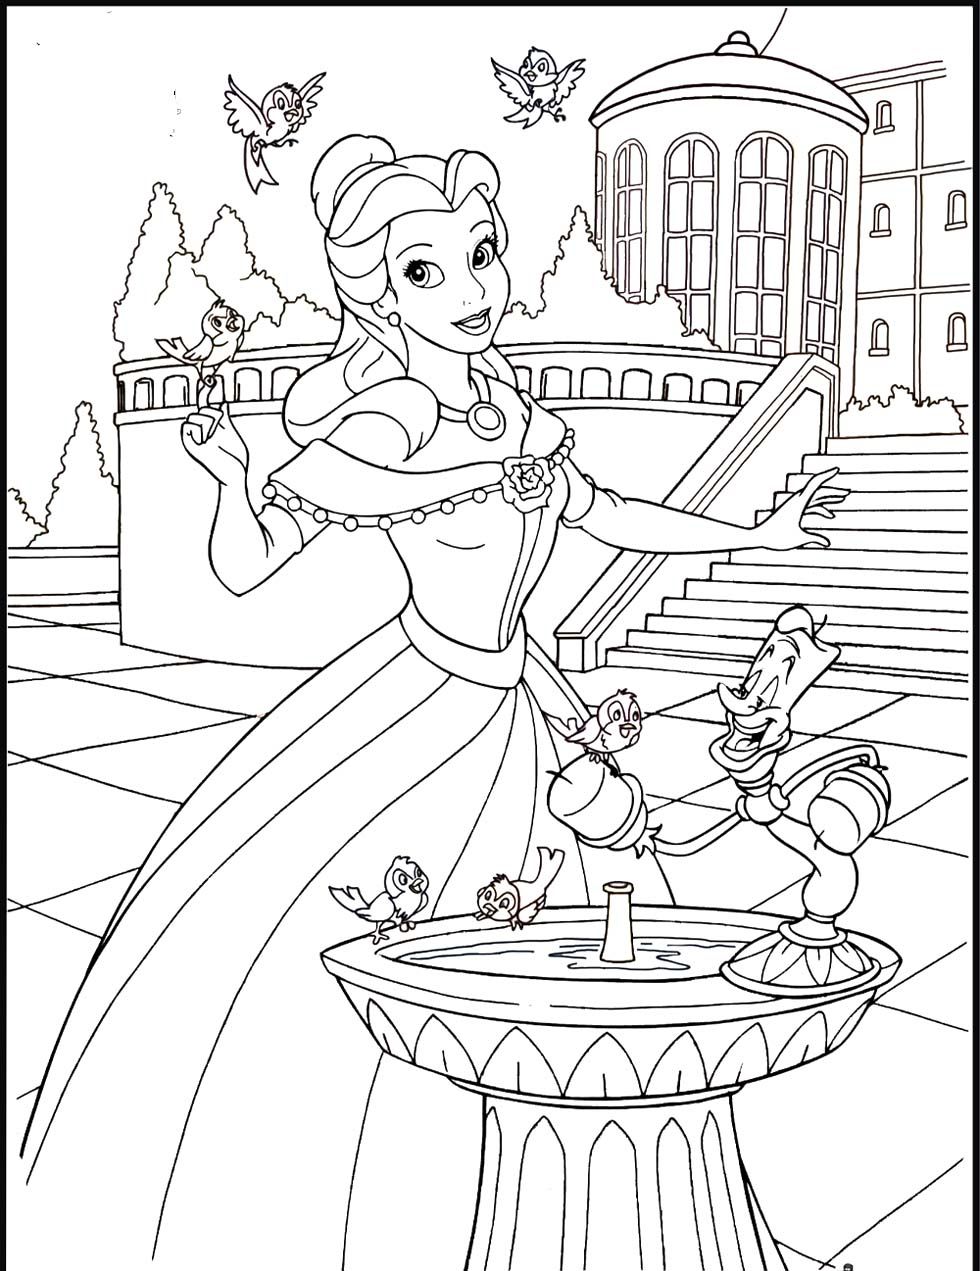 Disney Princess Winter Coloring Pages   High Quality Coloring ...